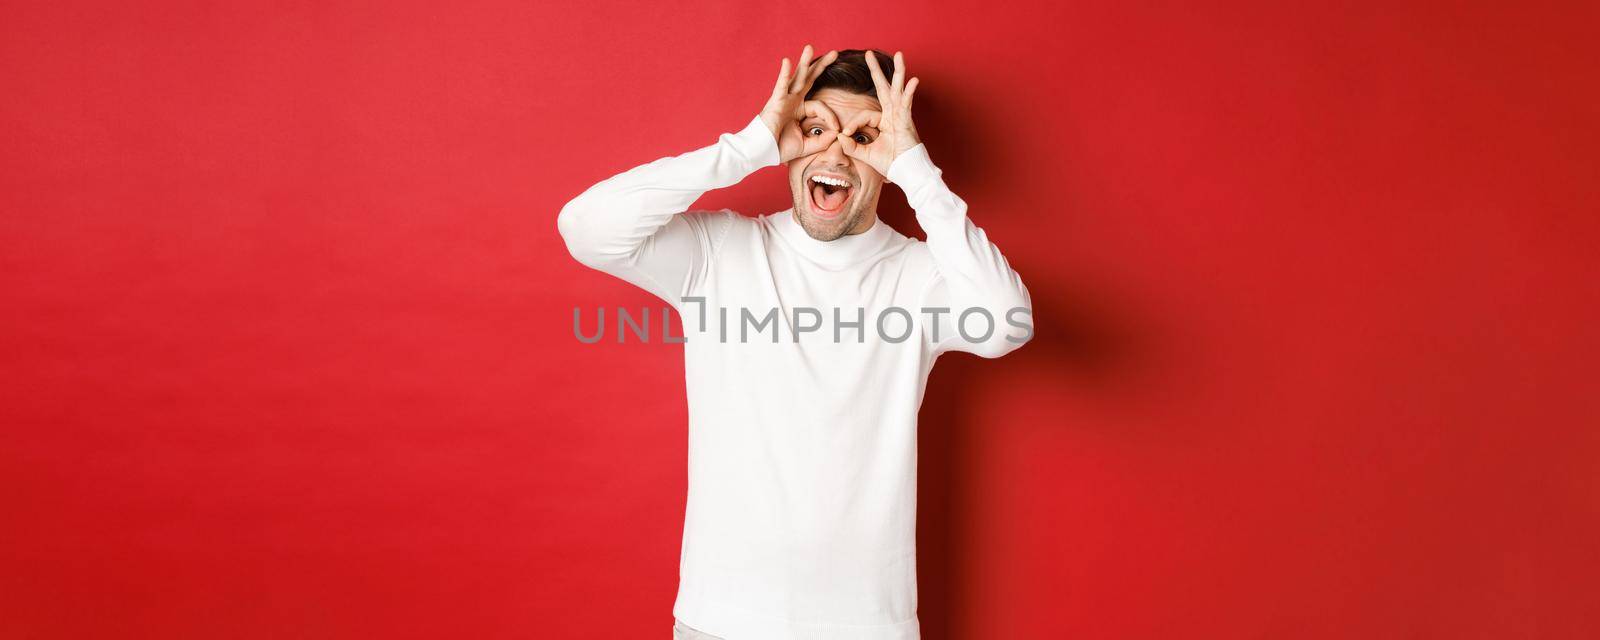 Portrait of handsome guy in white sweater, making funny mask with fingers, looking happy and smiling, standing over red background.